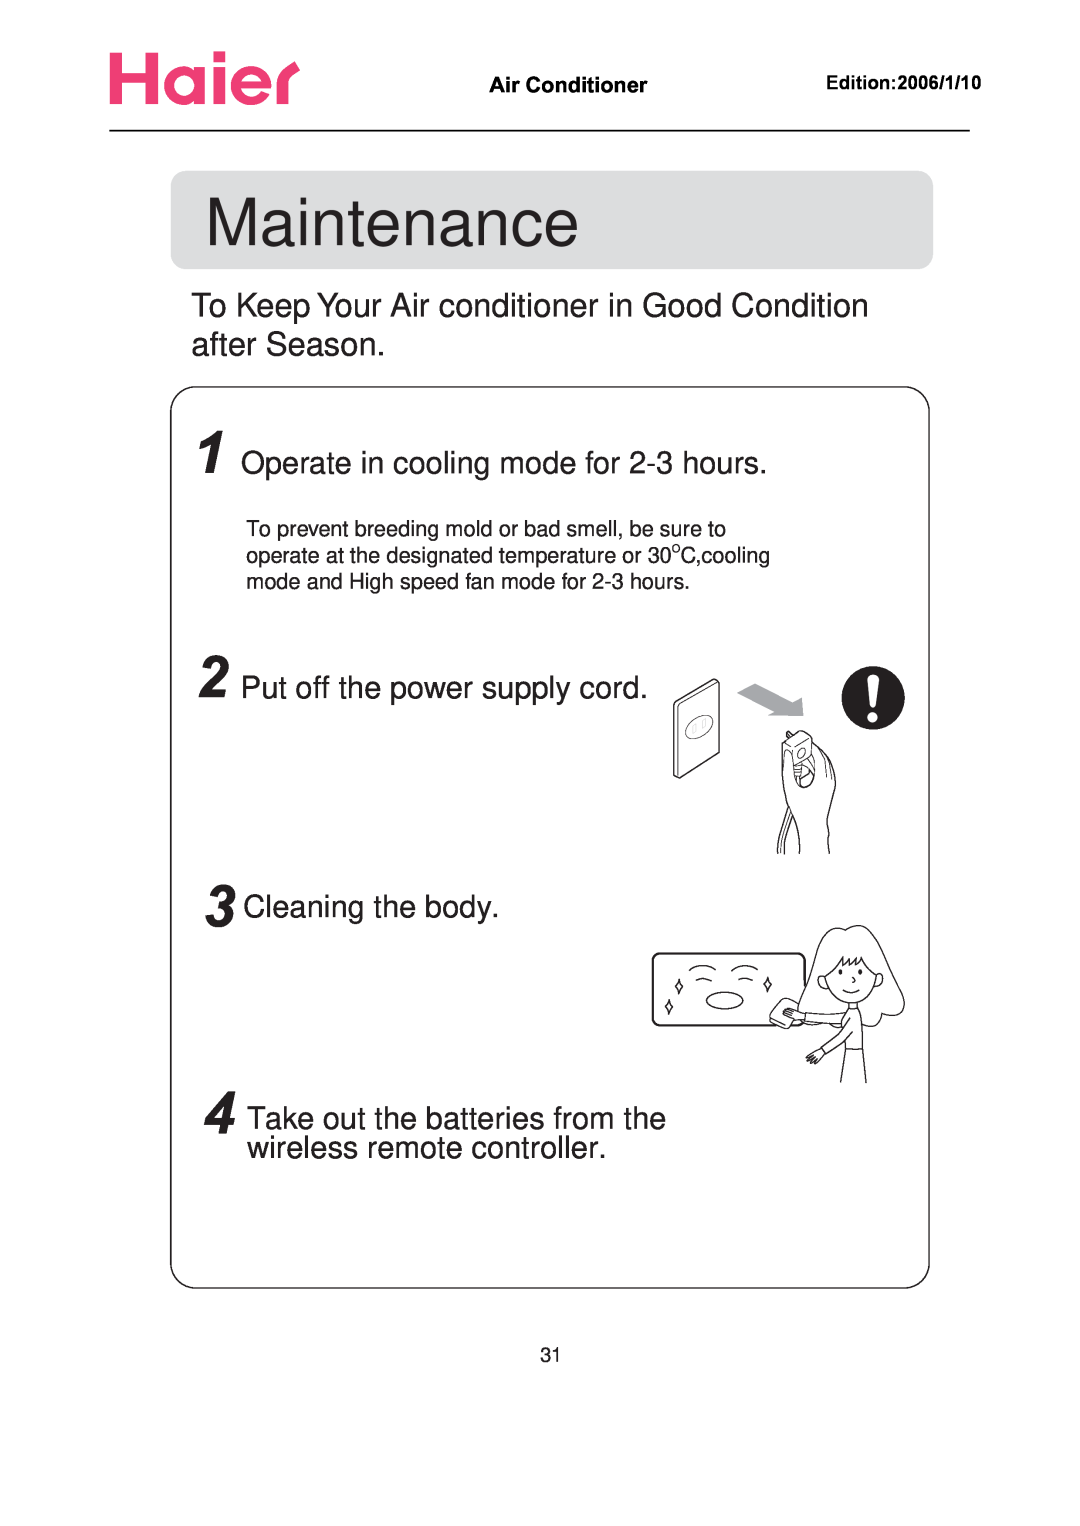 Haier Compact Air Conditioner manual Maintenance, Operate in cooling mode for 2-3hours, Air Conditioner       